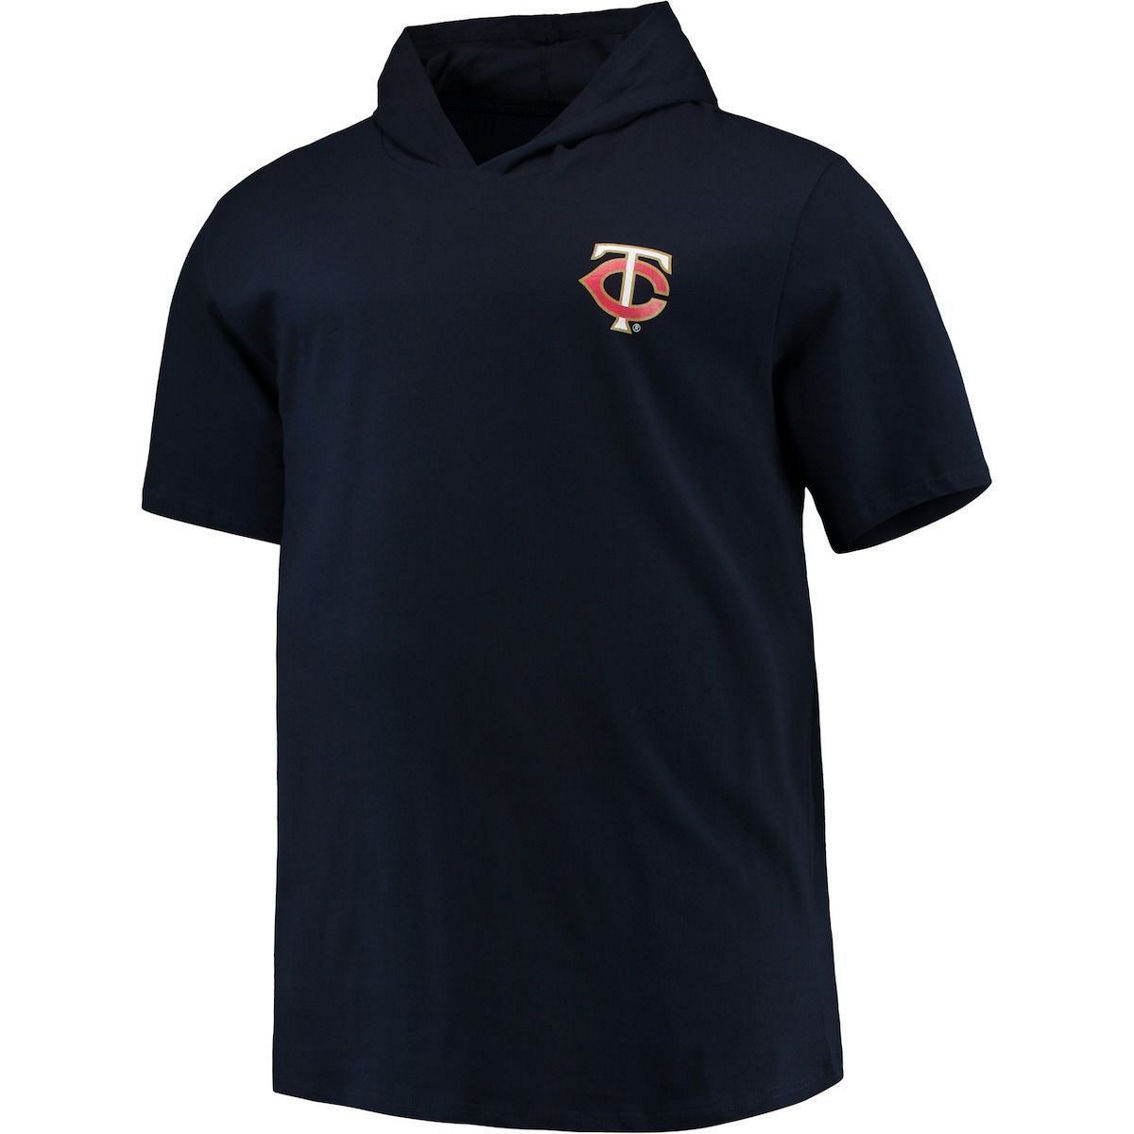 Profile Men's Navy Minnesota Twins Big & Tall Jersey Short Sleeve Pullover Hoodie T-Shirt - Image 3 of 4